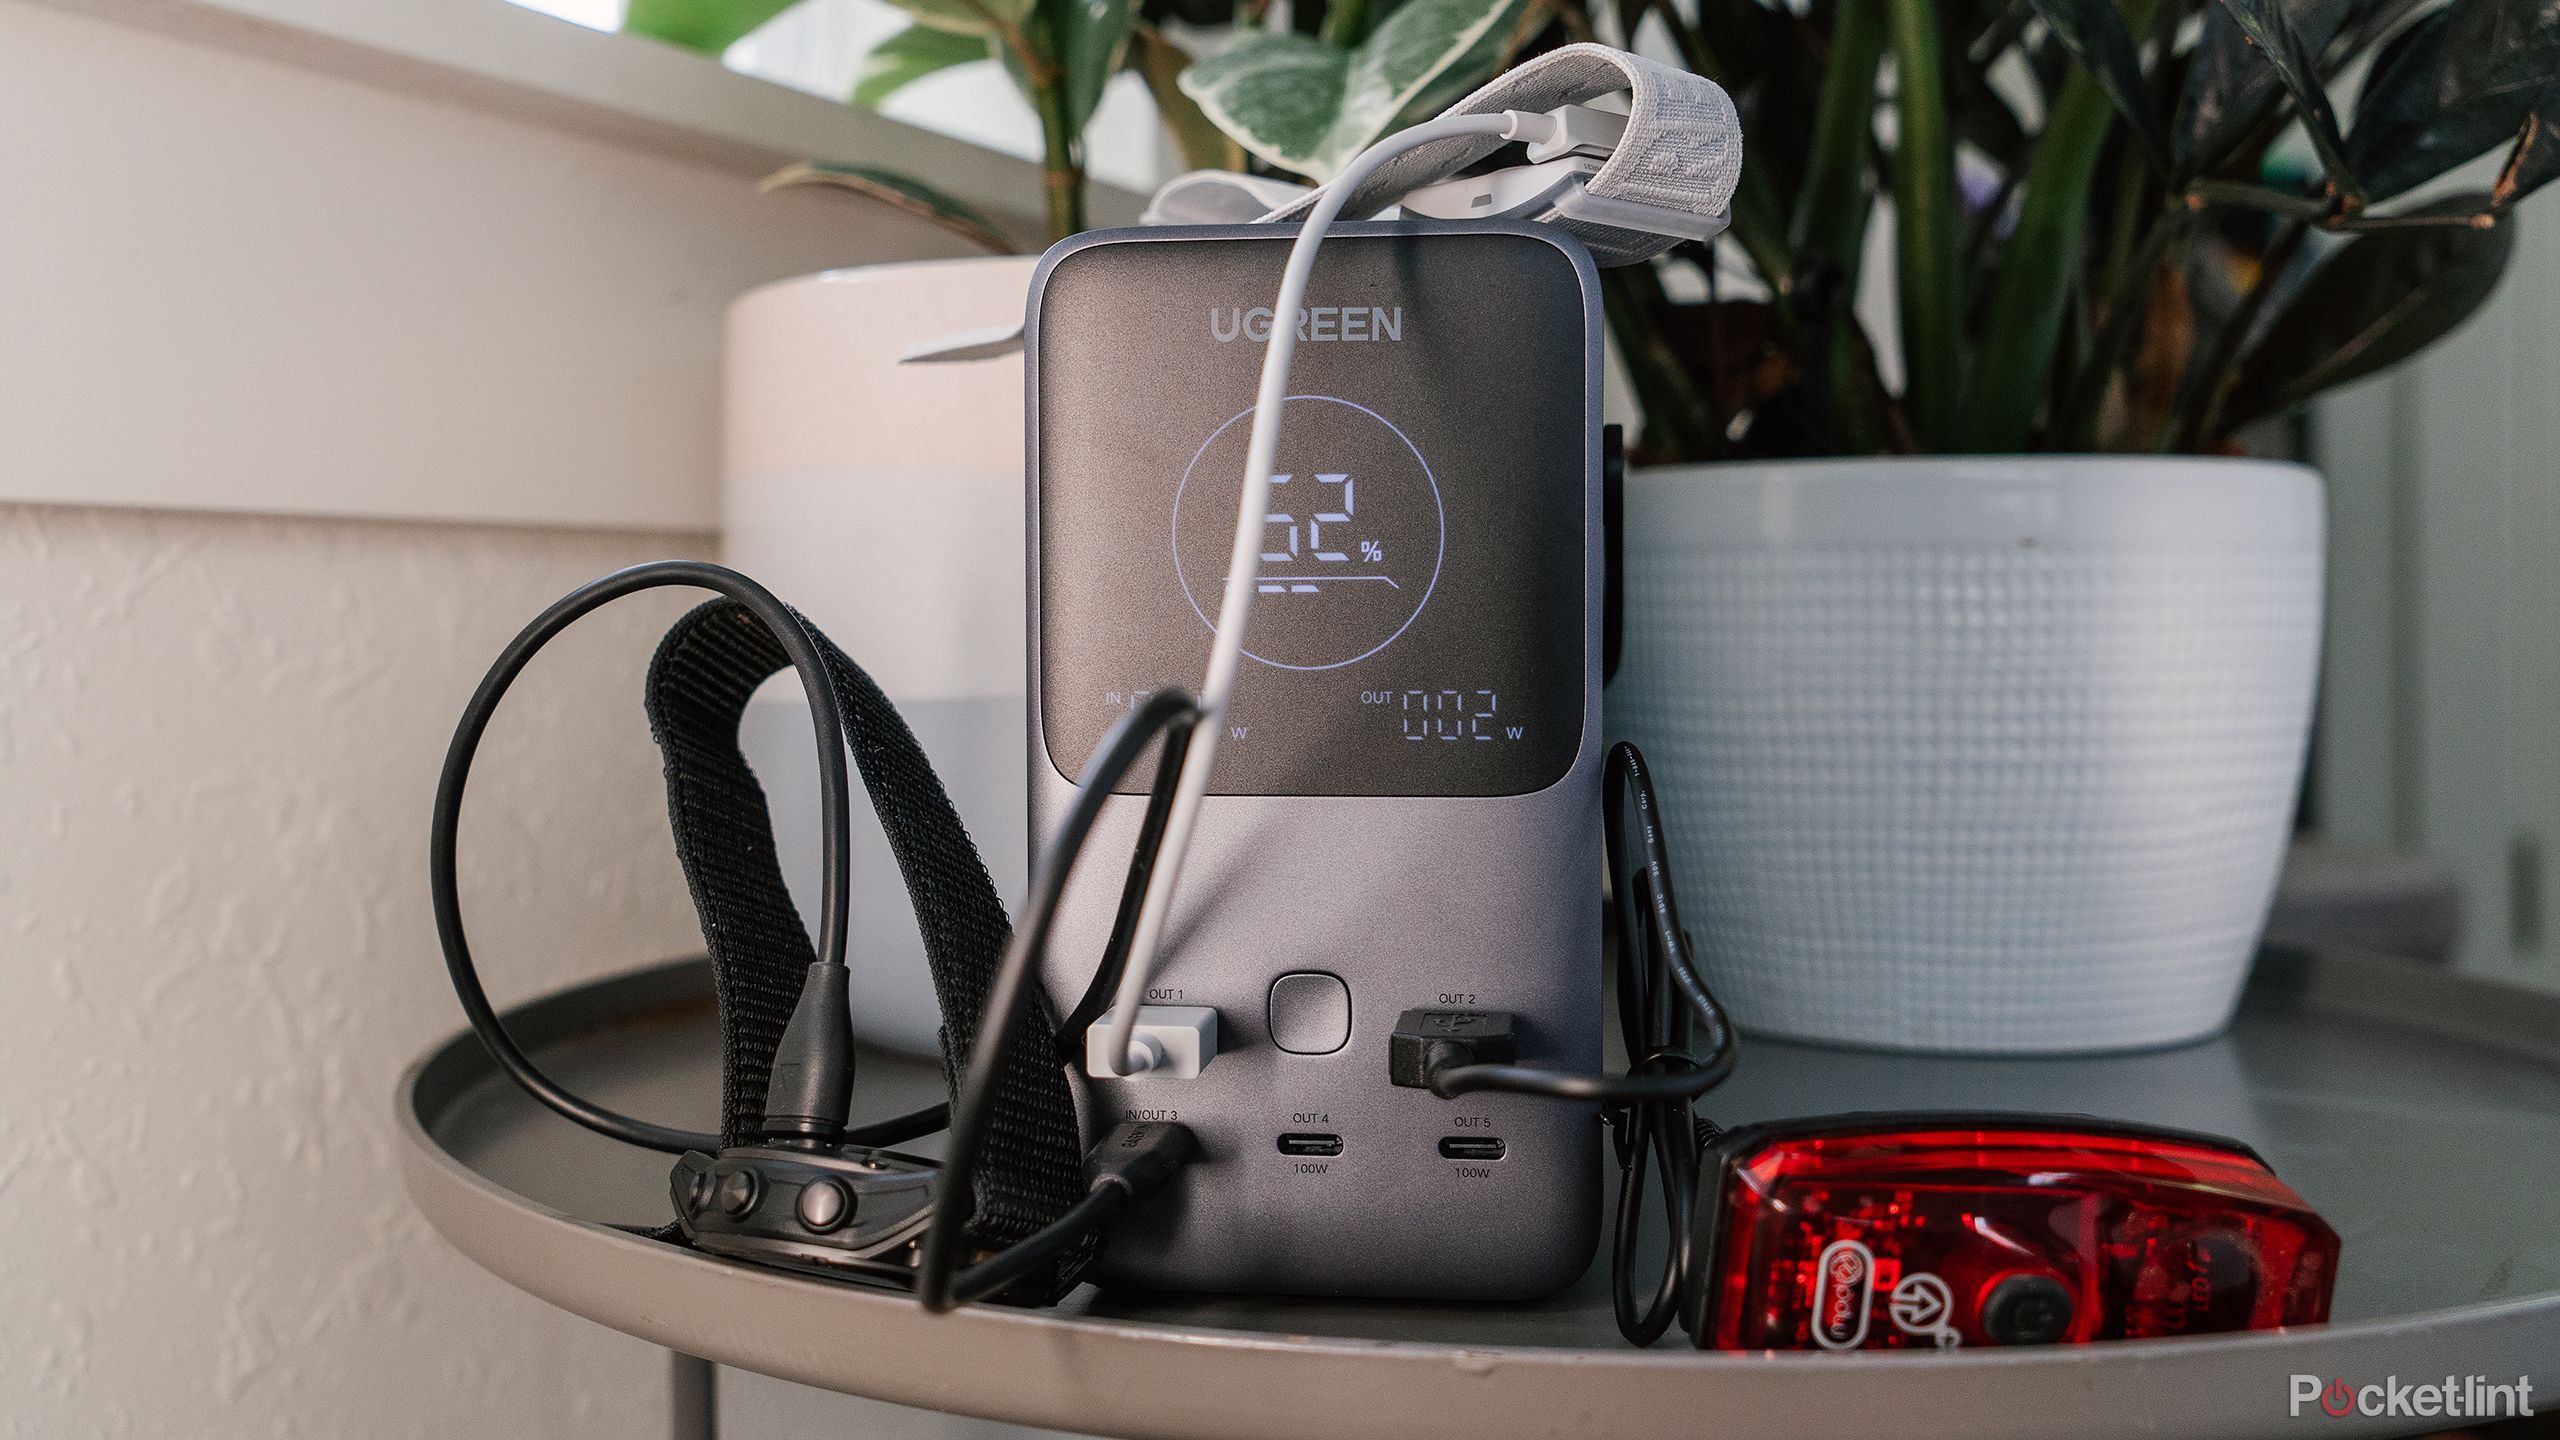 A pile of small devices and cords sit in front of the Ugreen 300W 48000mAh Power Bank on a gray table in front of potted plants. 